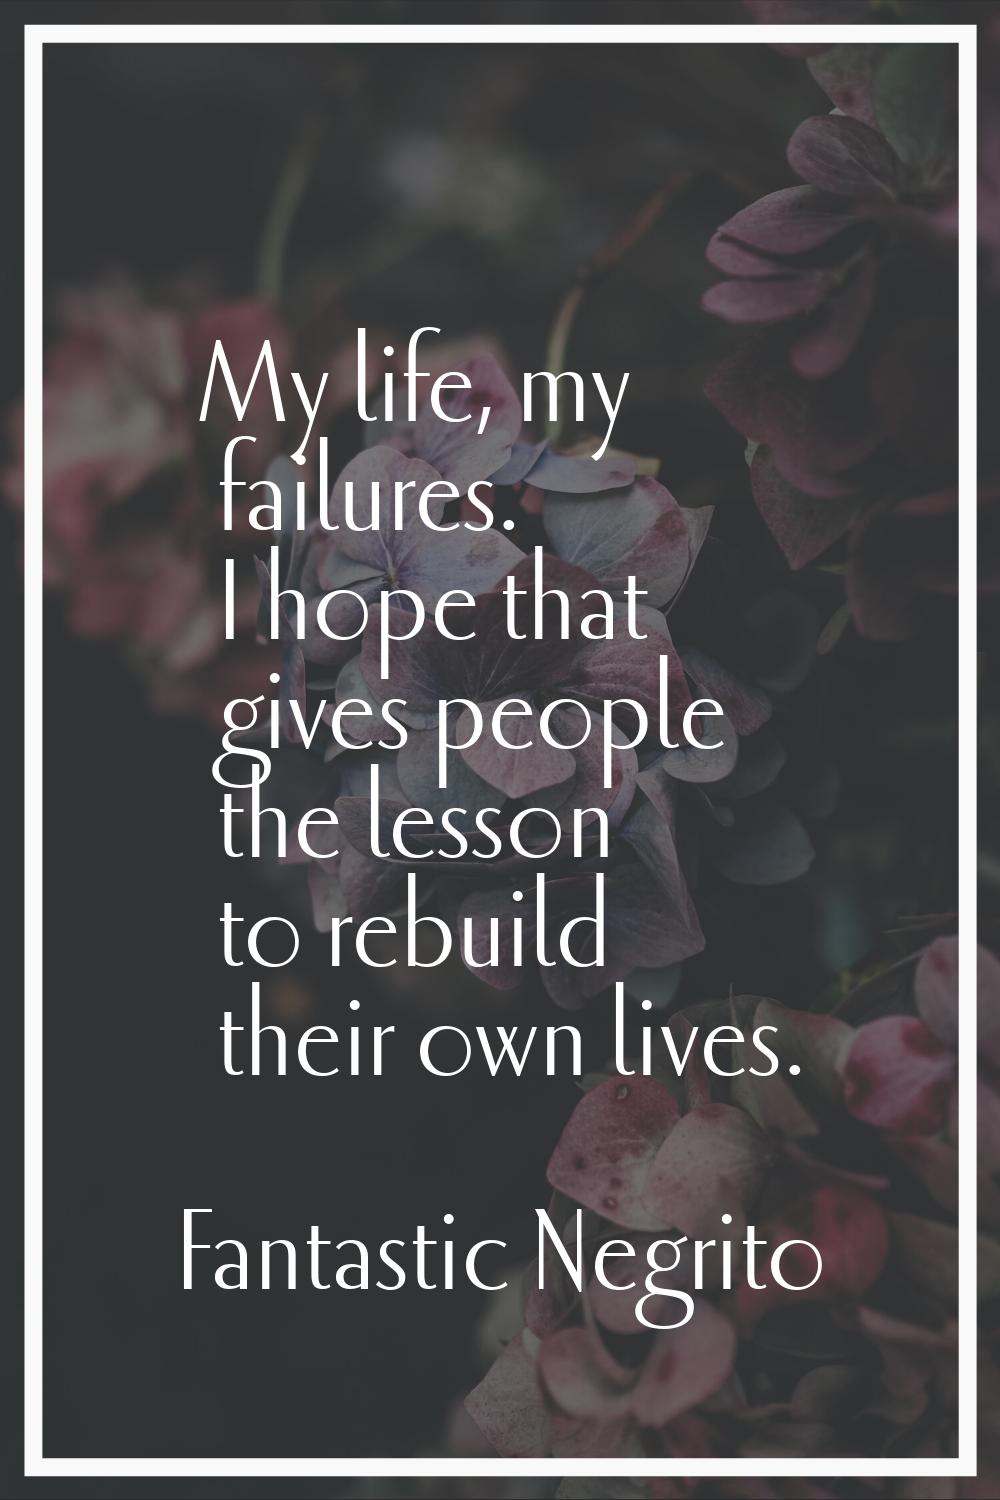 My life, my failures. I hope that gives people the lesson to rebuild their own lives.